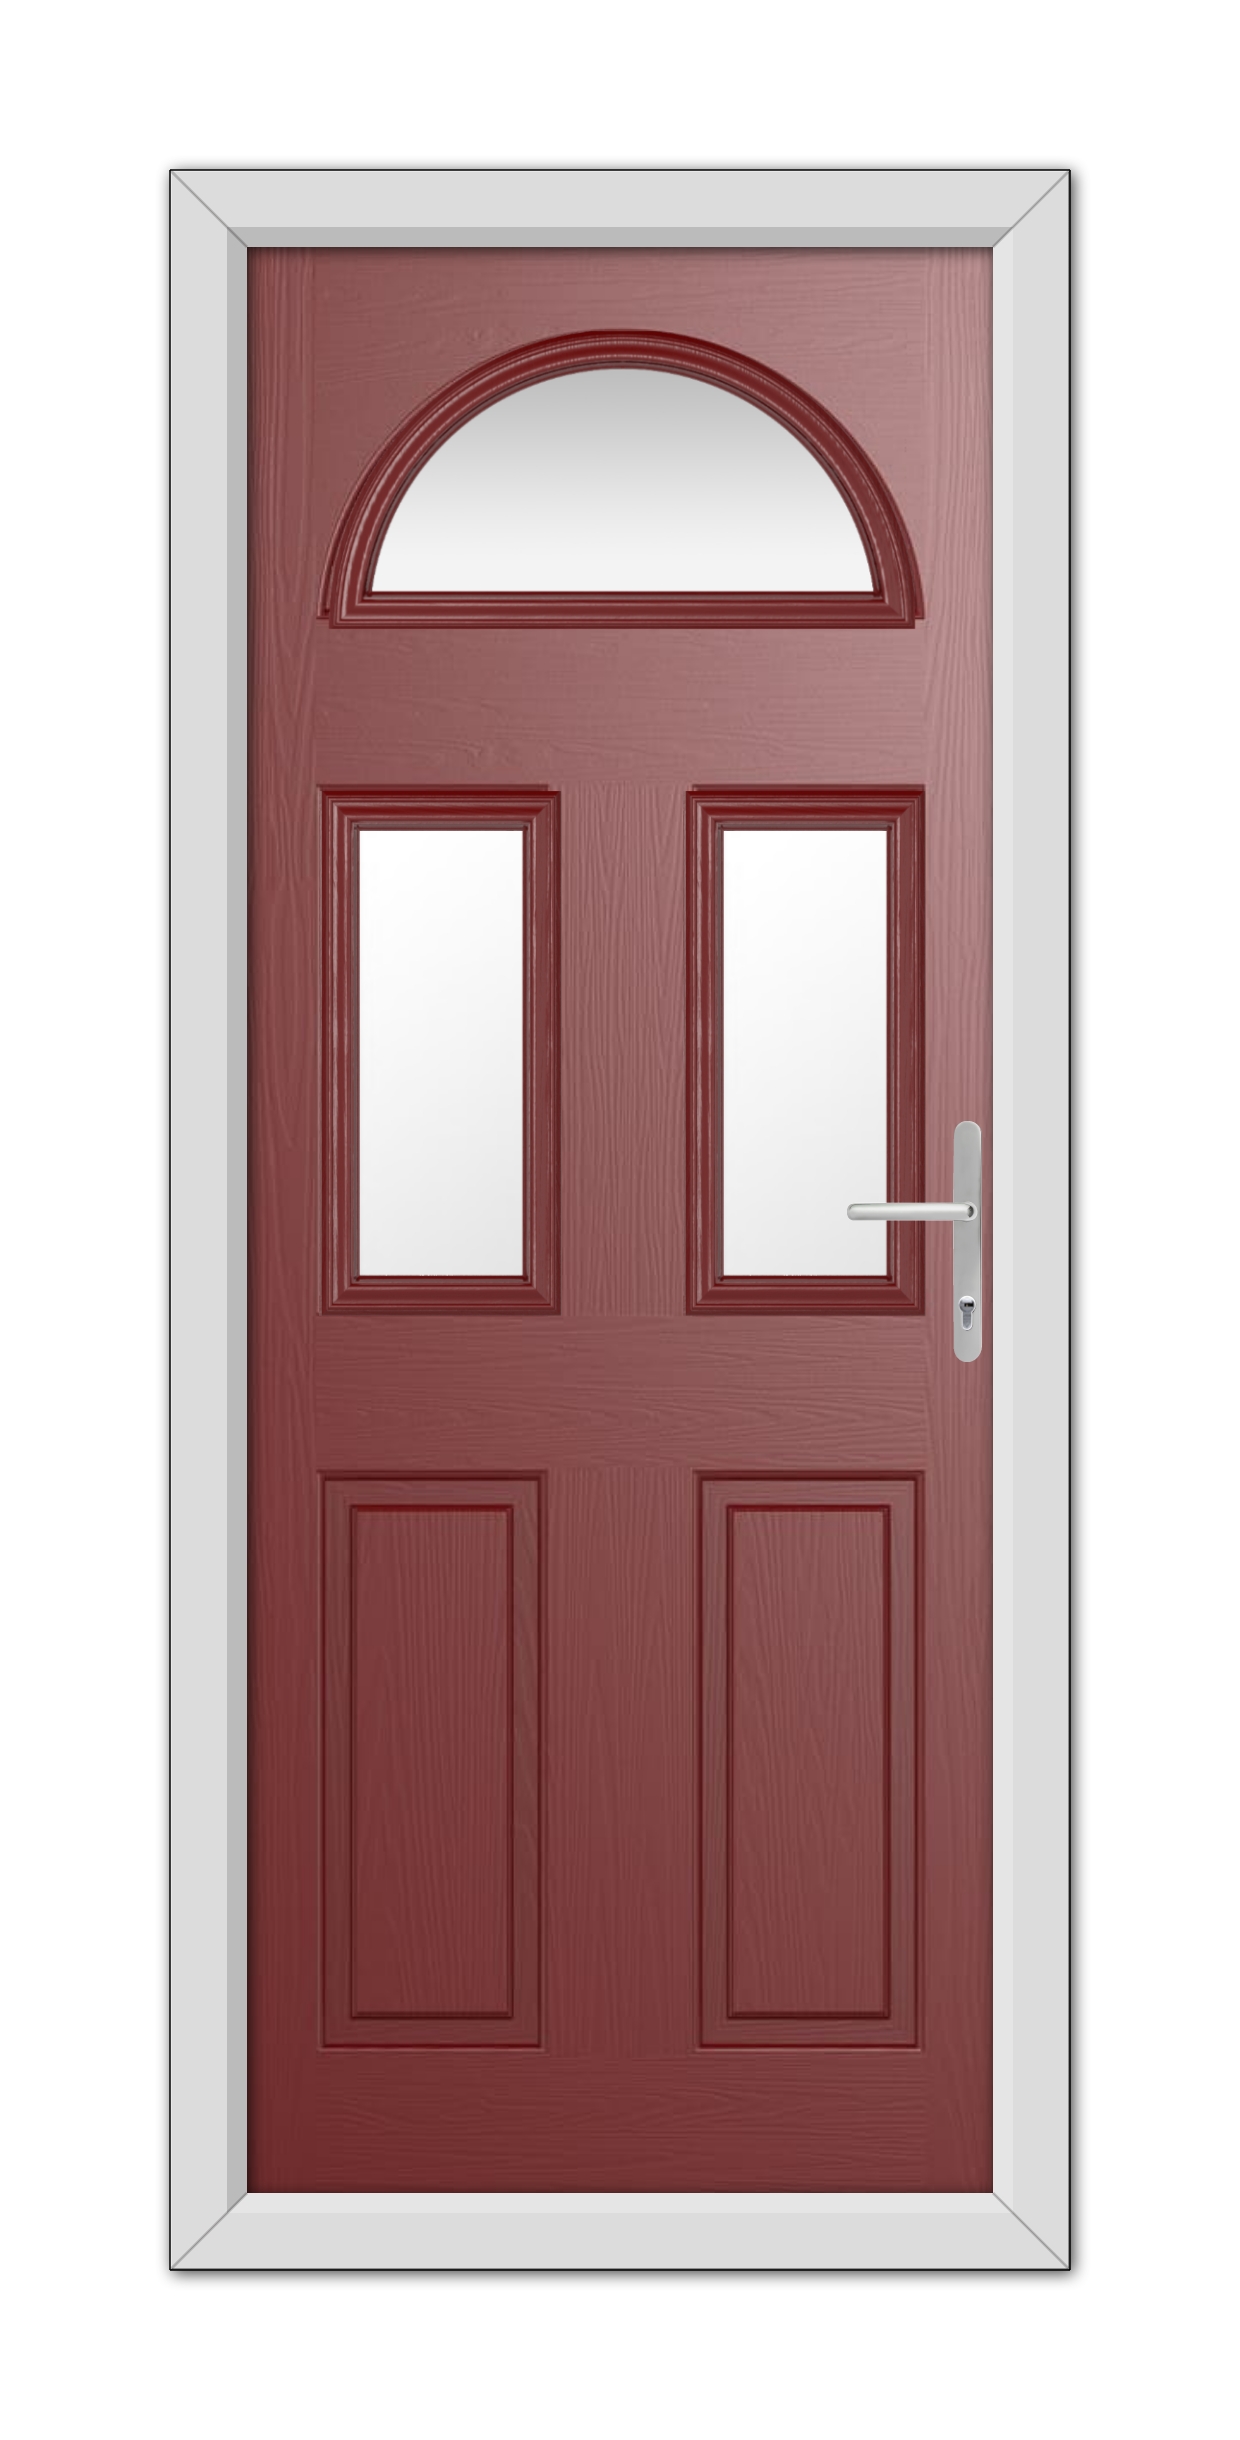 A Red Winslow 3 Composite Door 48mm Timber Core with an arched window at the top and two rectangular windows, one on each door panel, framed in white with a modern handle.